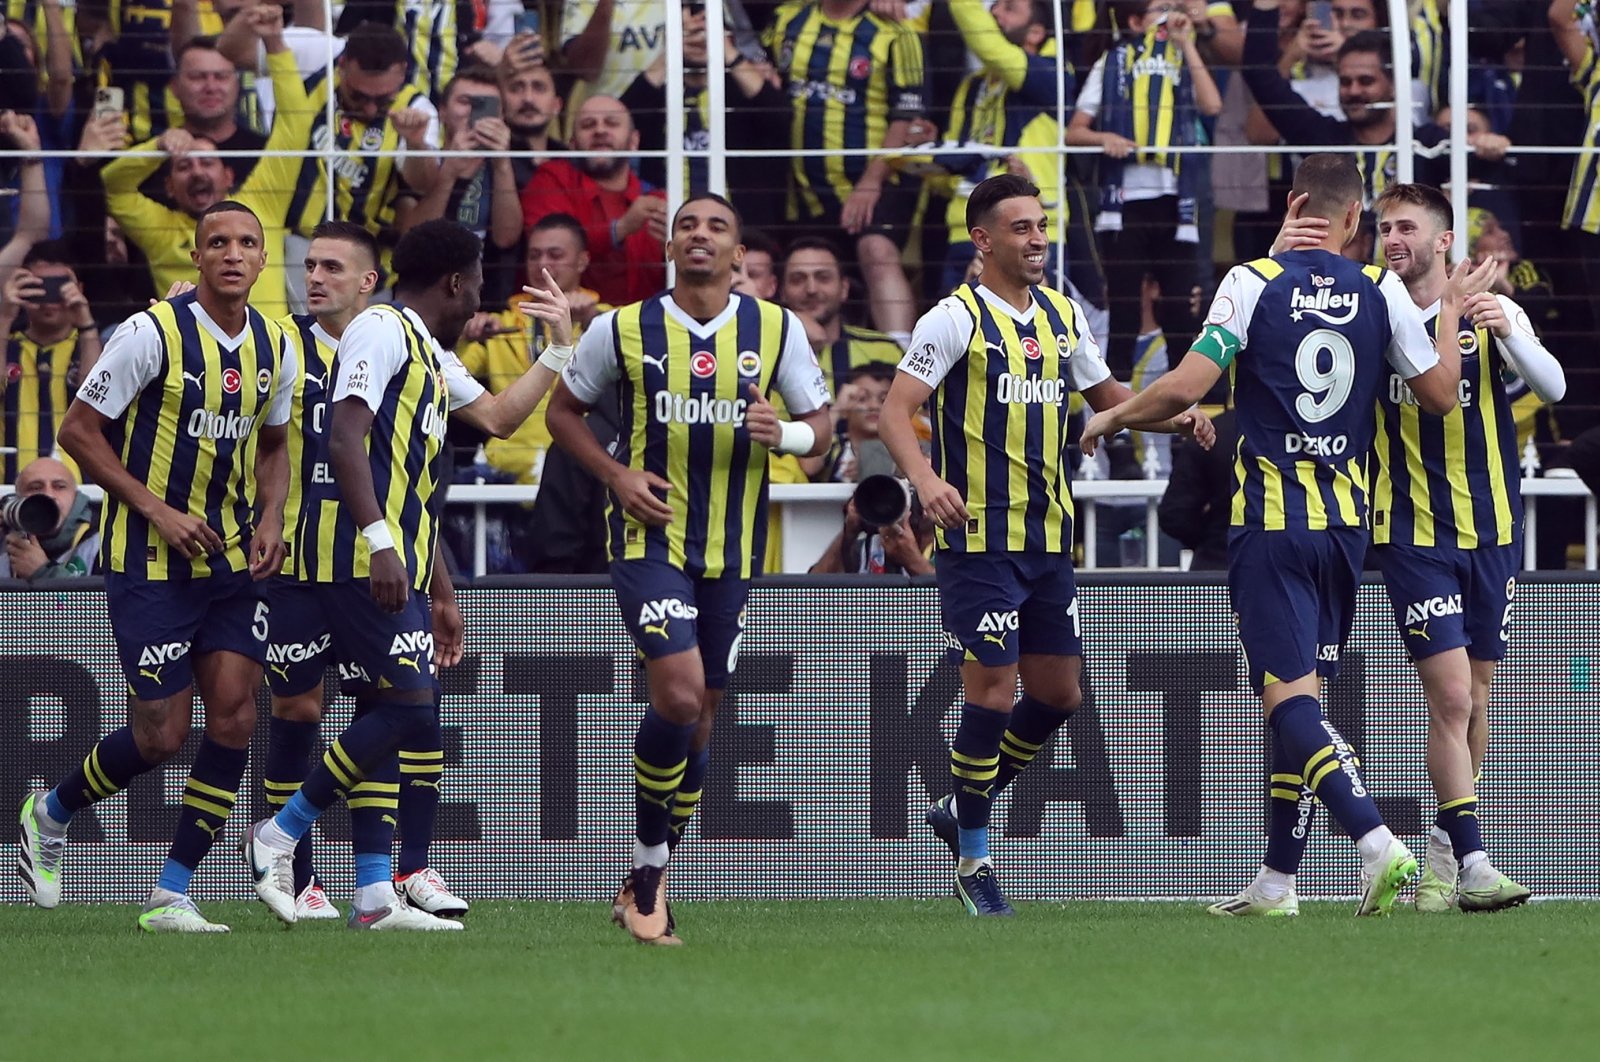 Fenerbahçe, Beşiktaş go all in for early Conference League groups